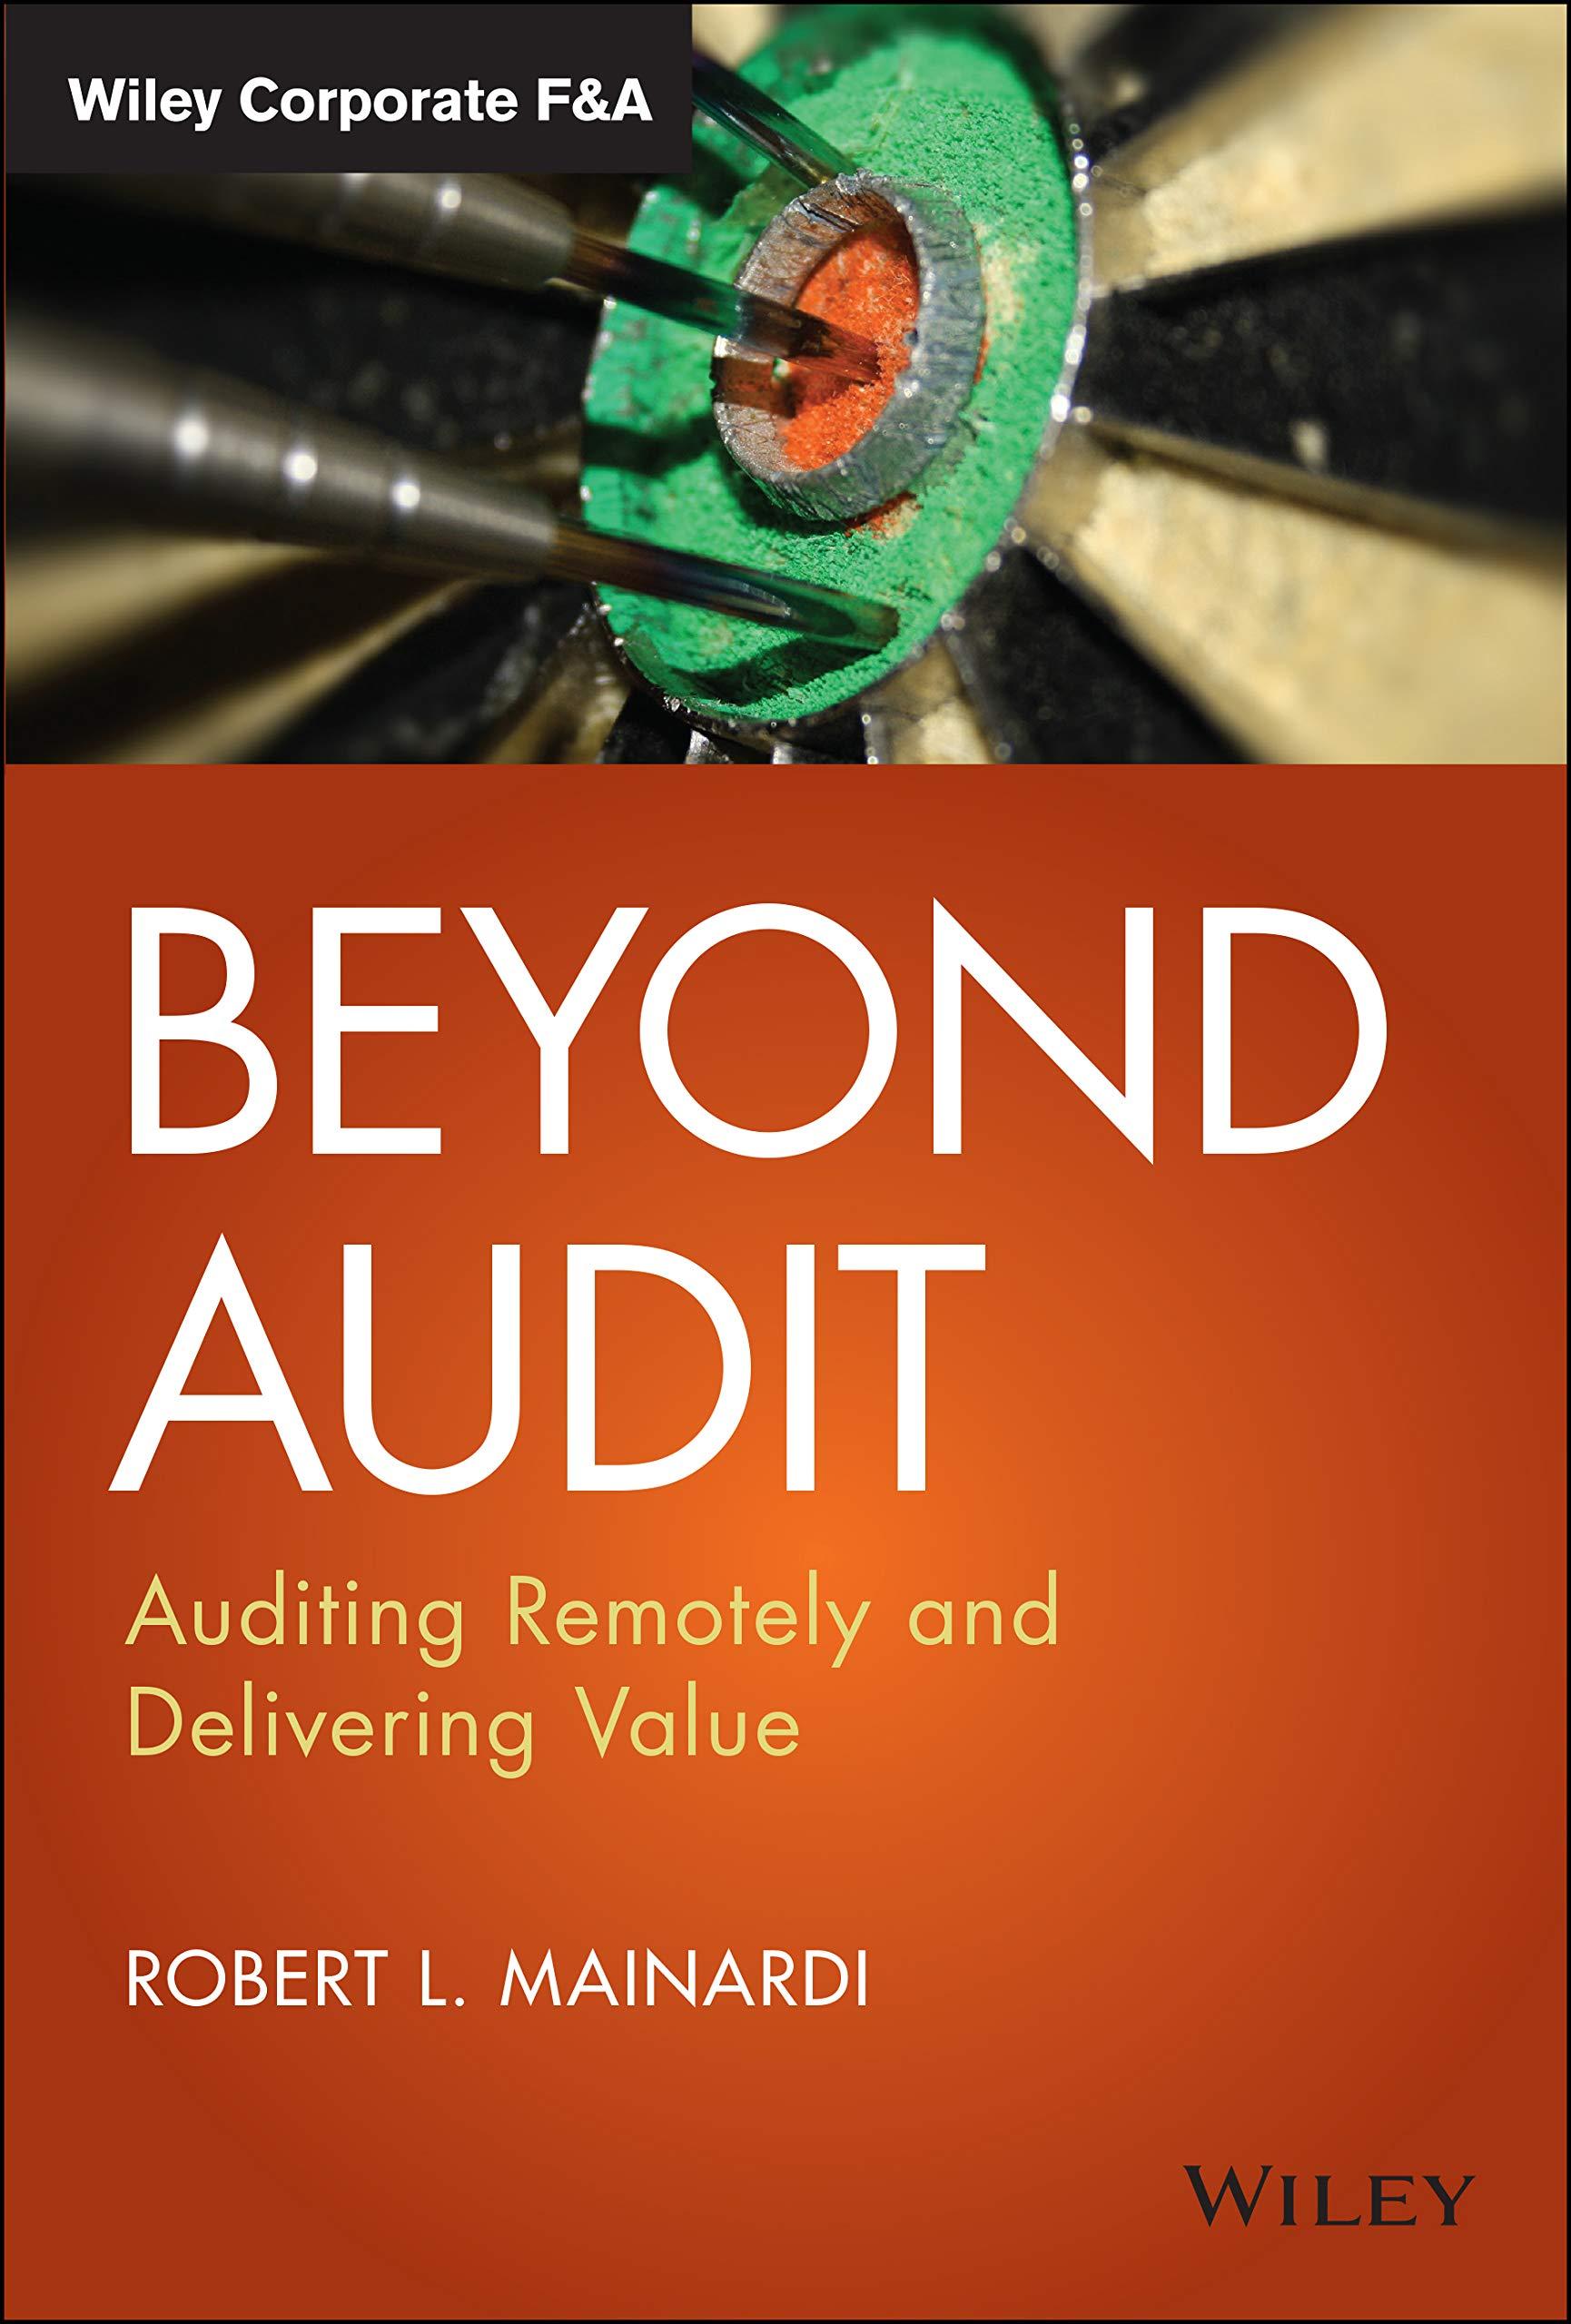 beyond audit auditing remotely and delivering value 1st edition robert l. mainardi 1119789605, 978-1119789604